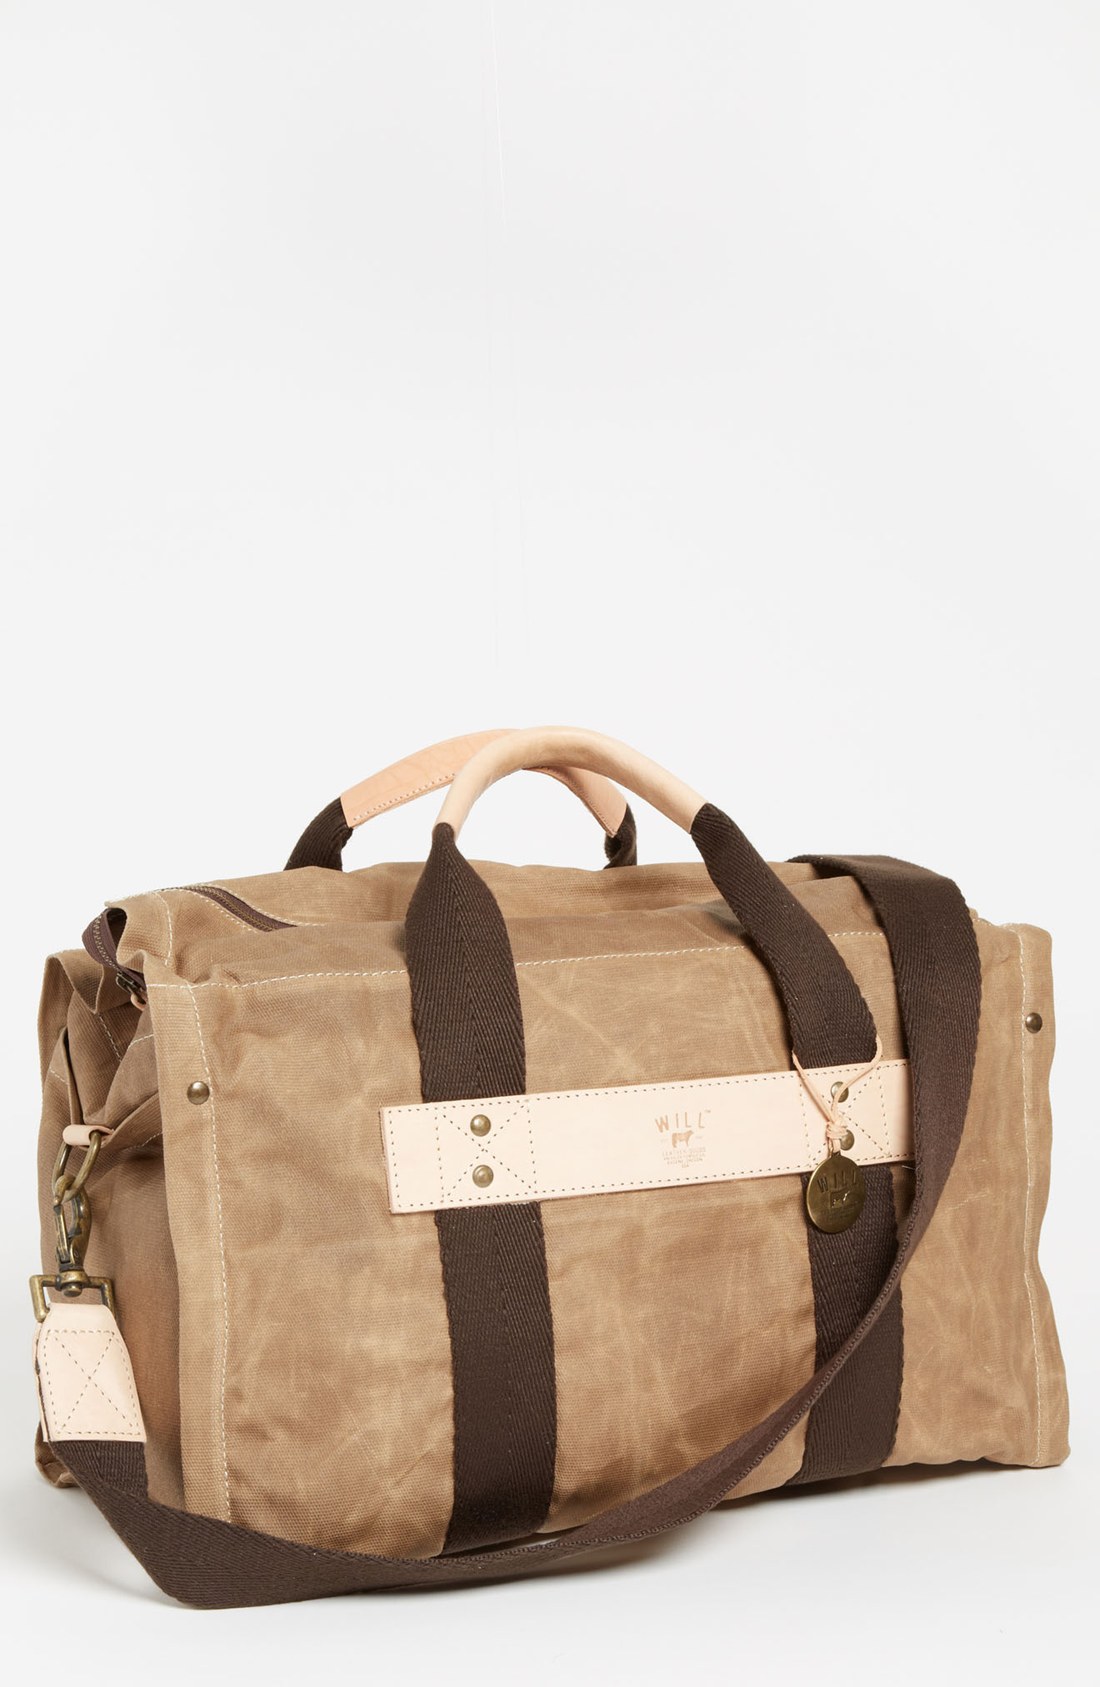 Will Leather Goods Canvas Duffel Bag in Khaki for Men | Lyst